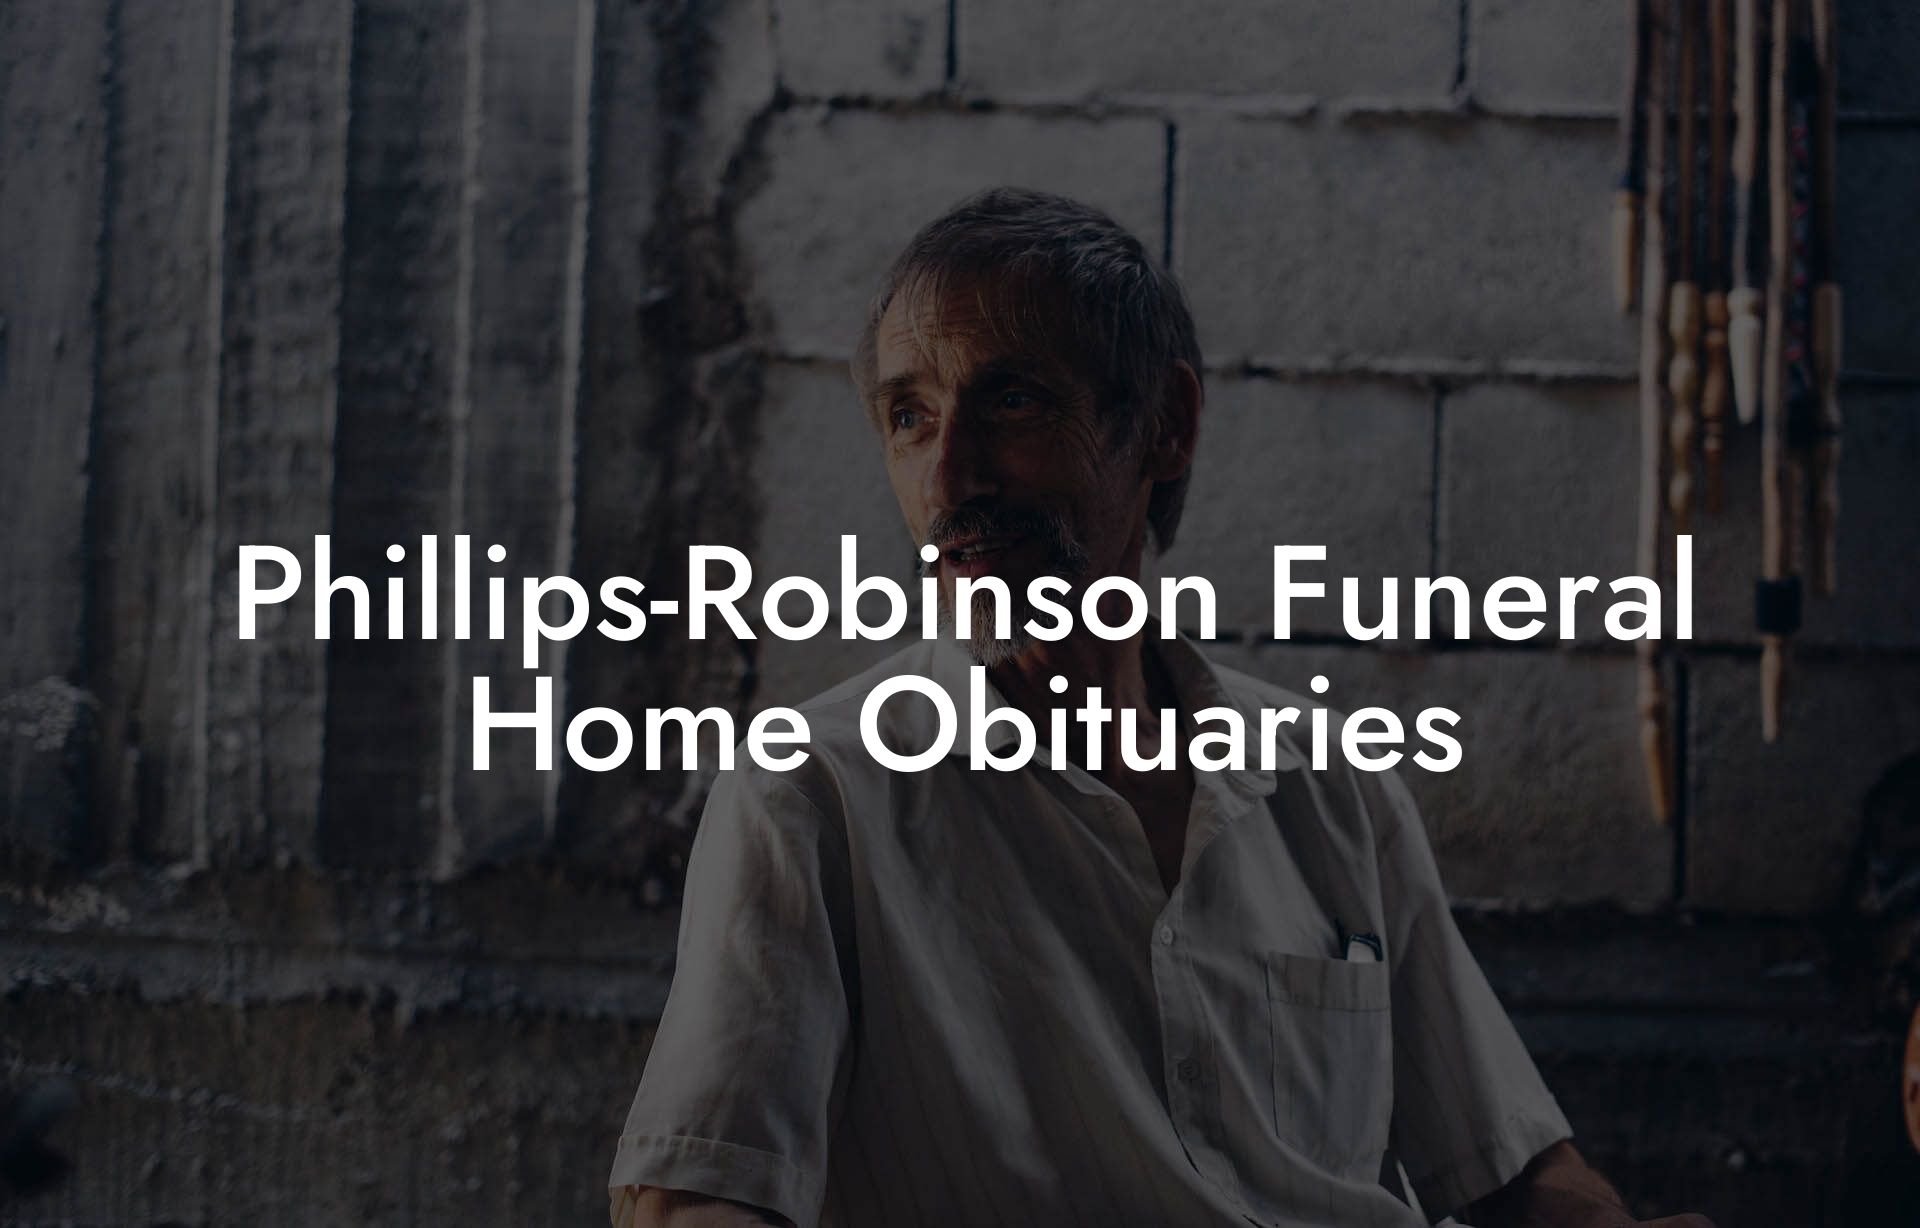 Phillips-Robinson Funeral Home Obituaries